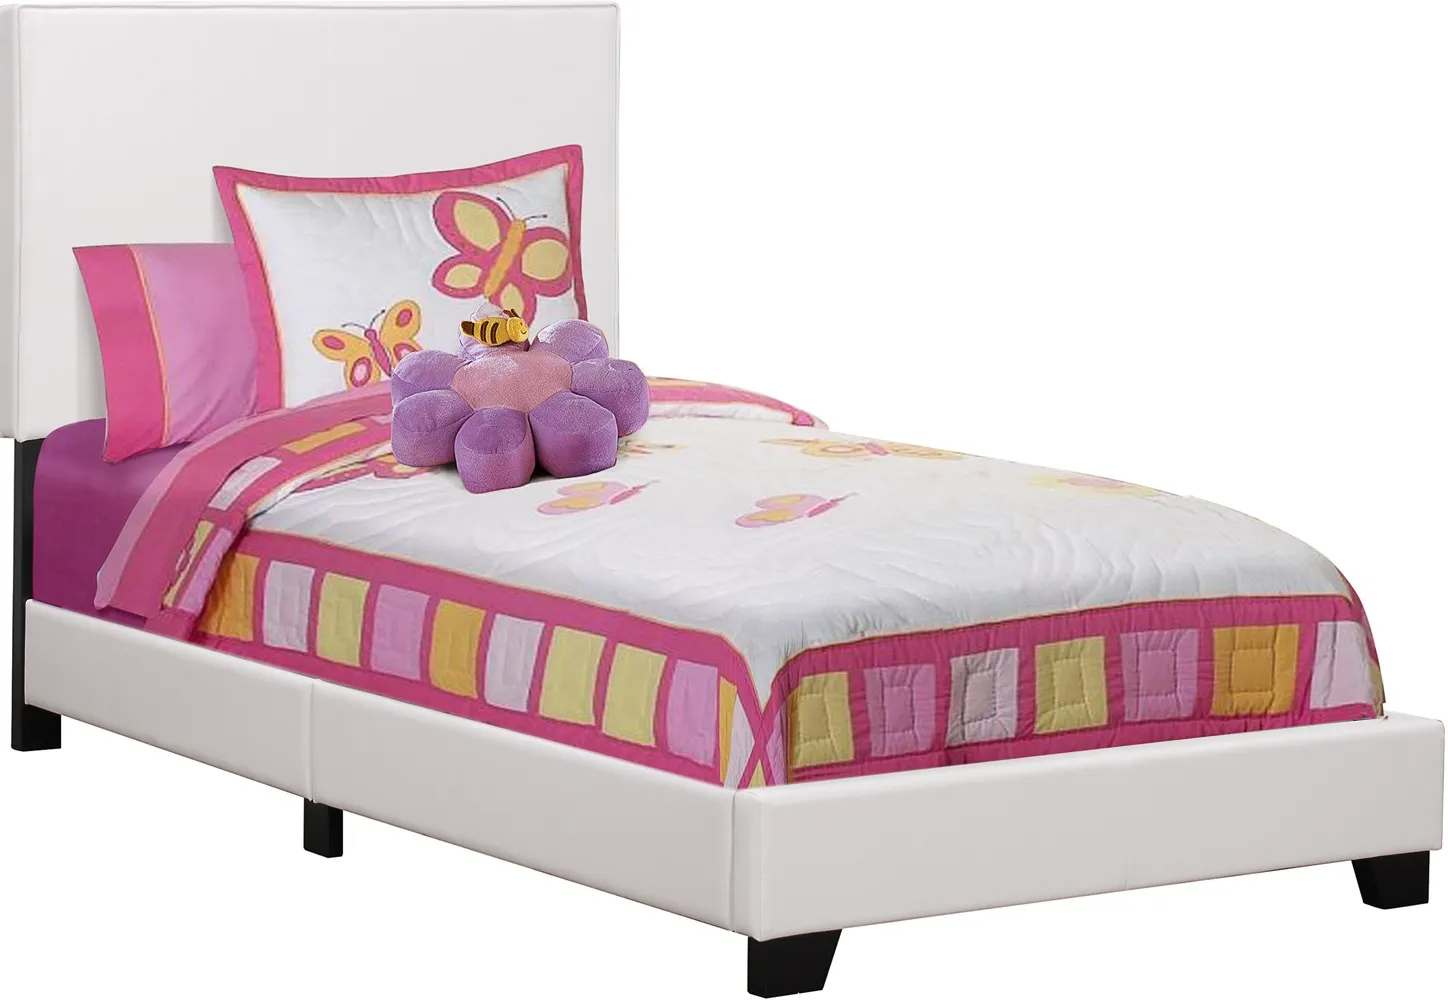 Bed, Twin Size, Platform, Bedroom, Frame, Upholstered, Pu Leather Look, Wood Legs, White, Transitional